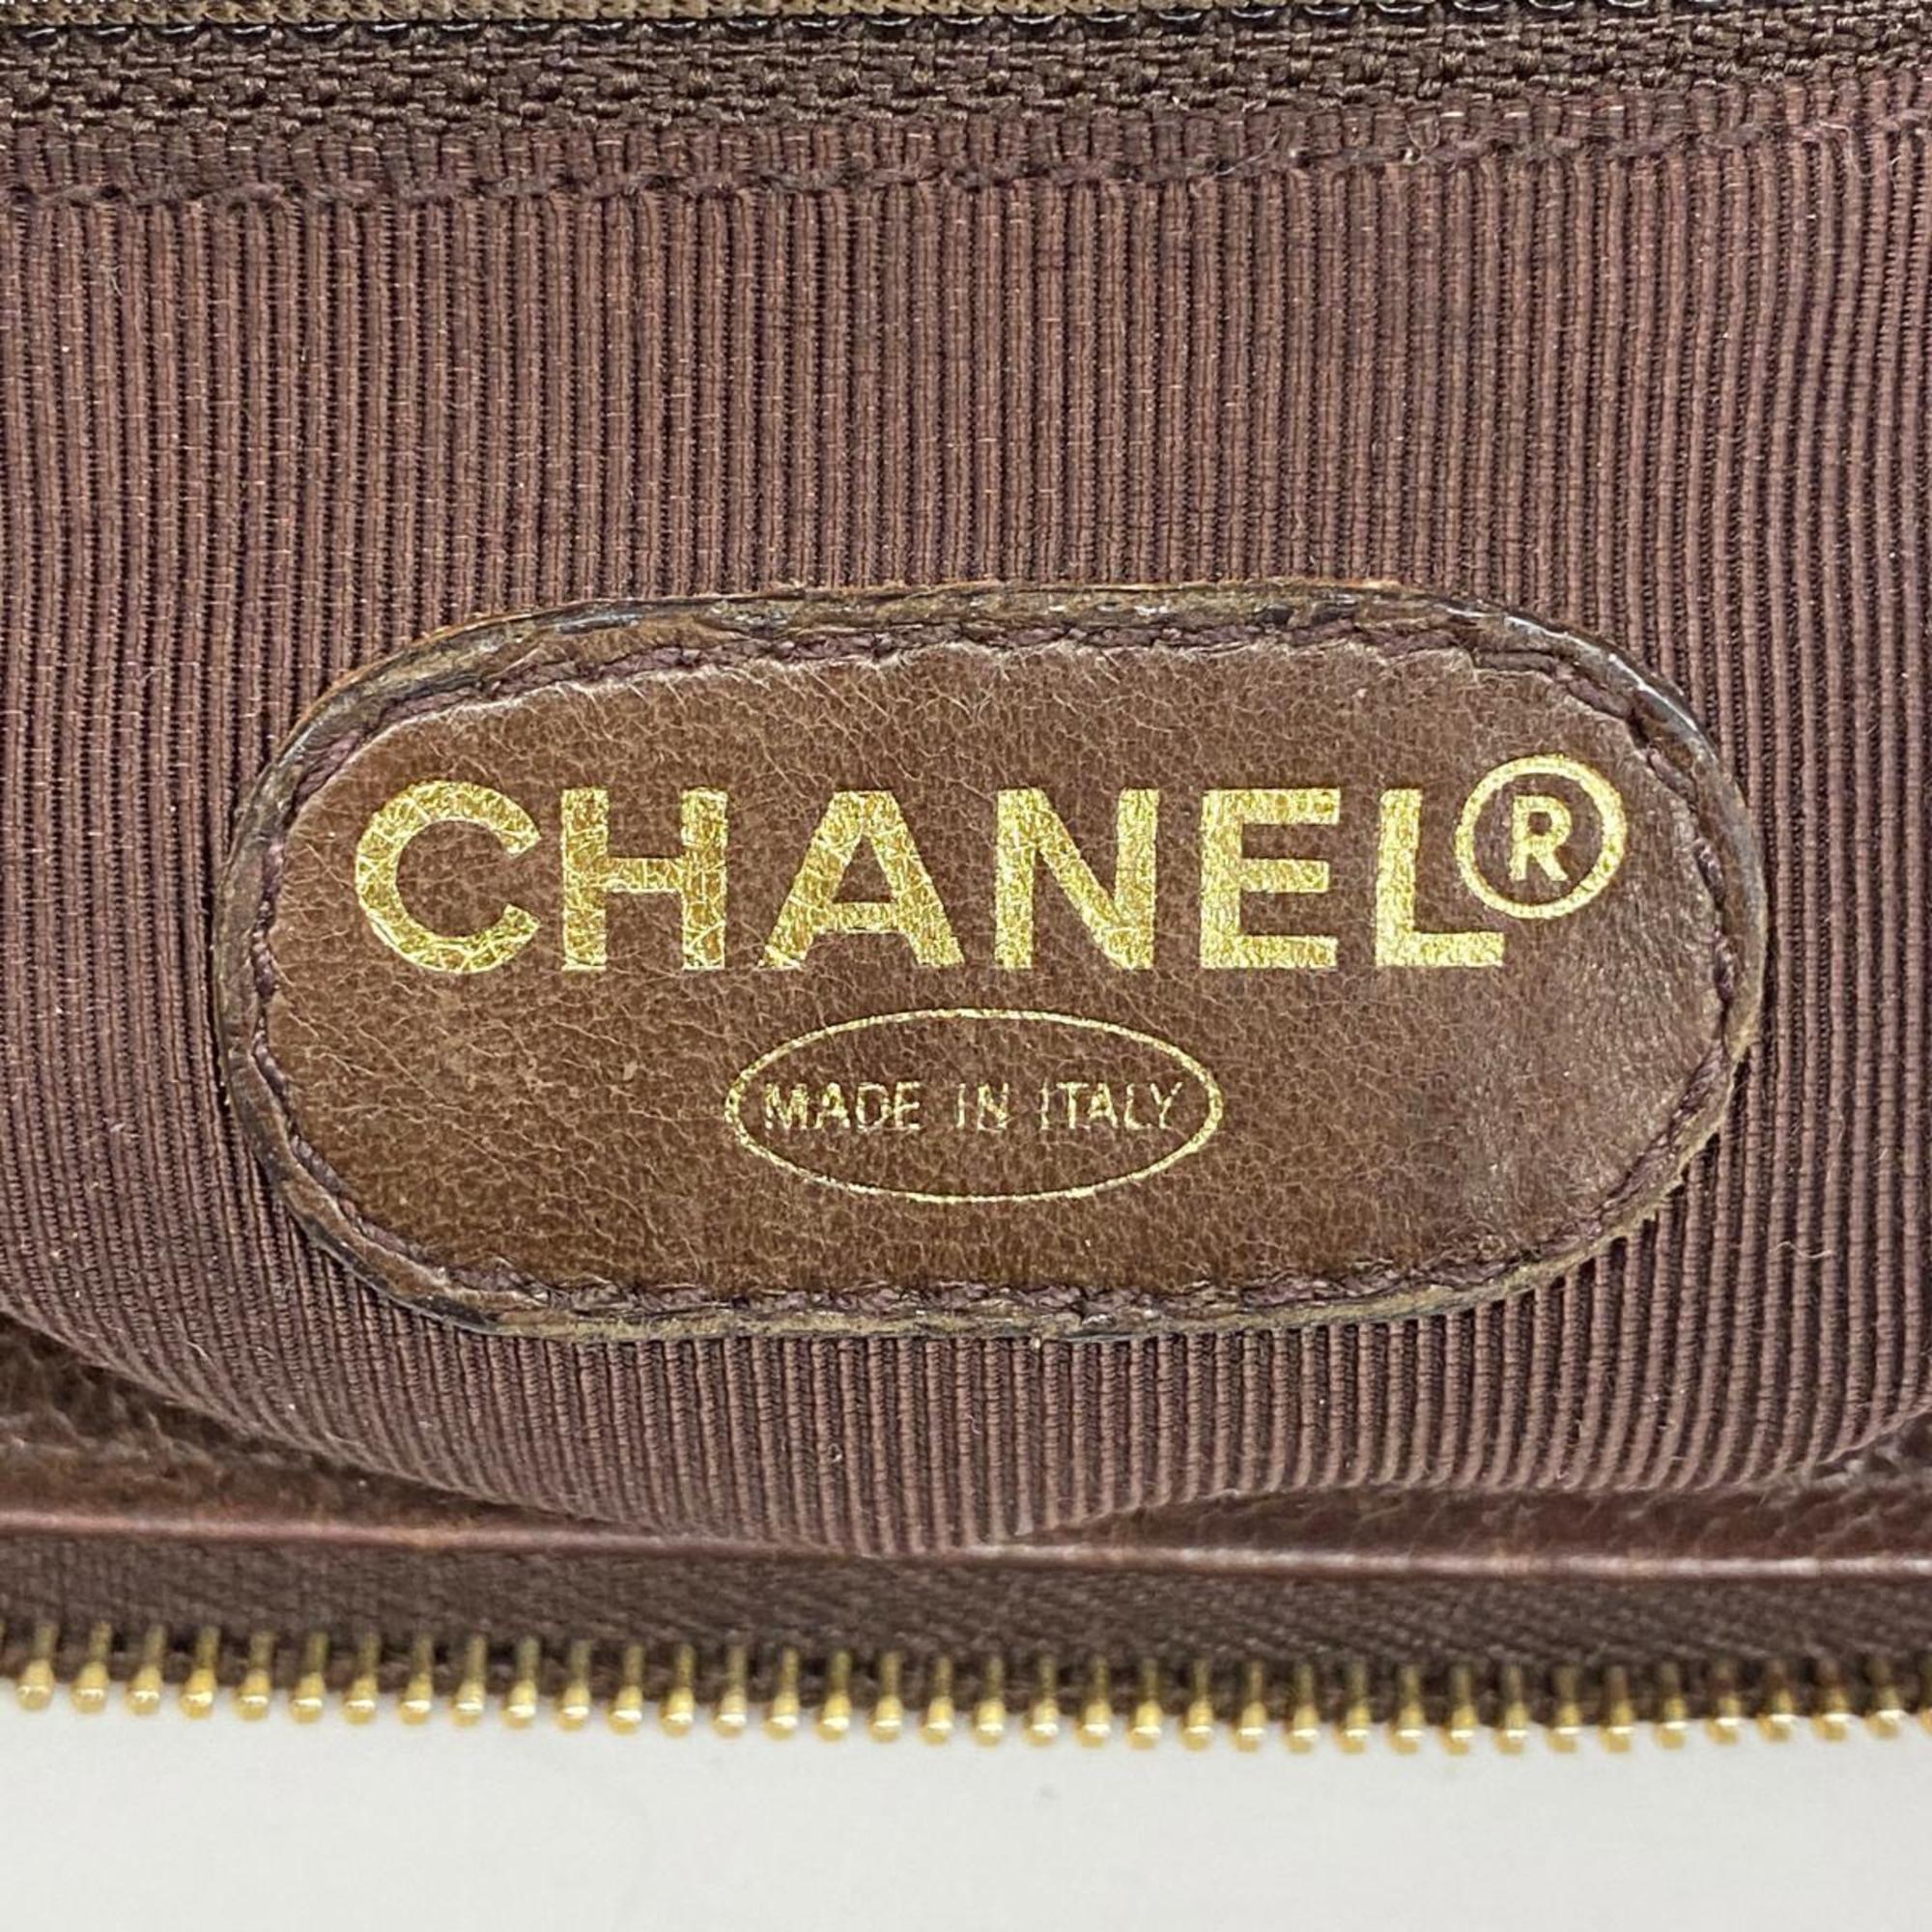 Chanel Shoulder Bag Triple Coco Chain Leather Brown Women's